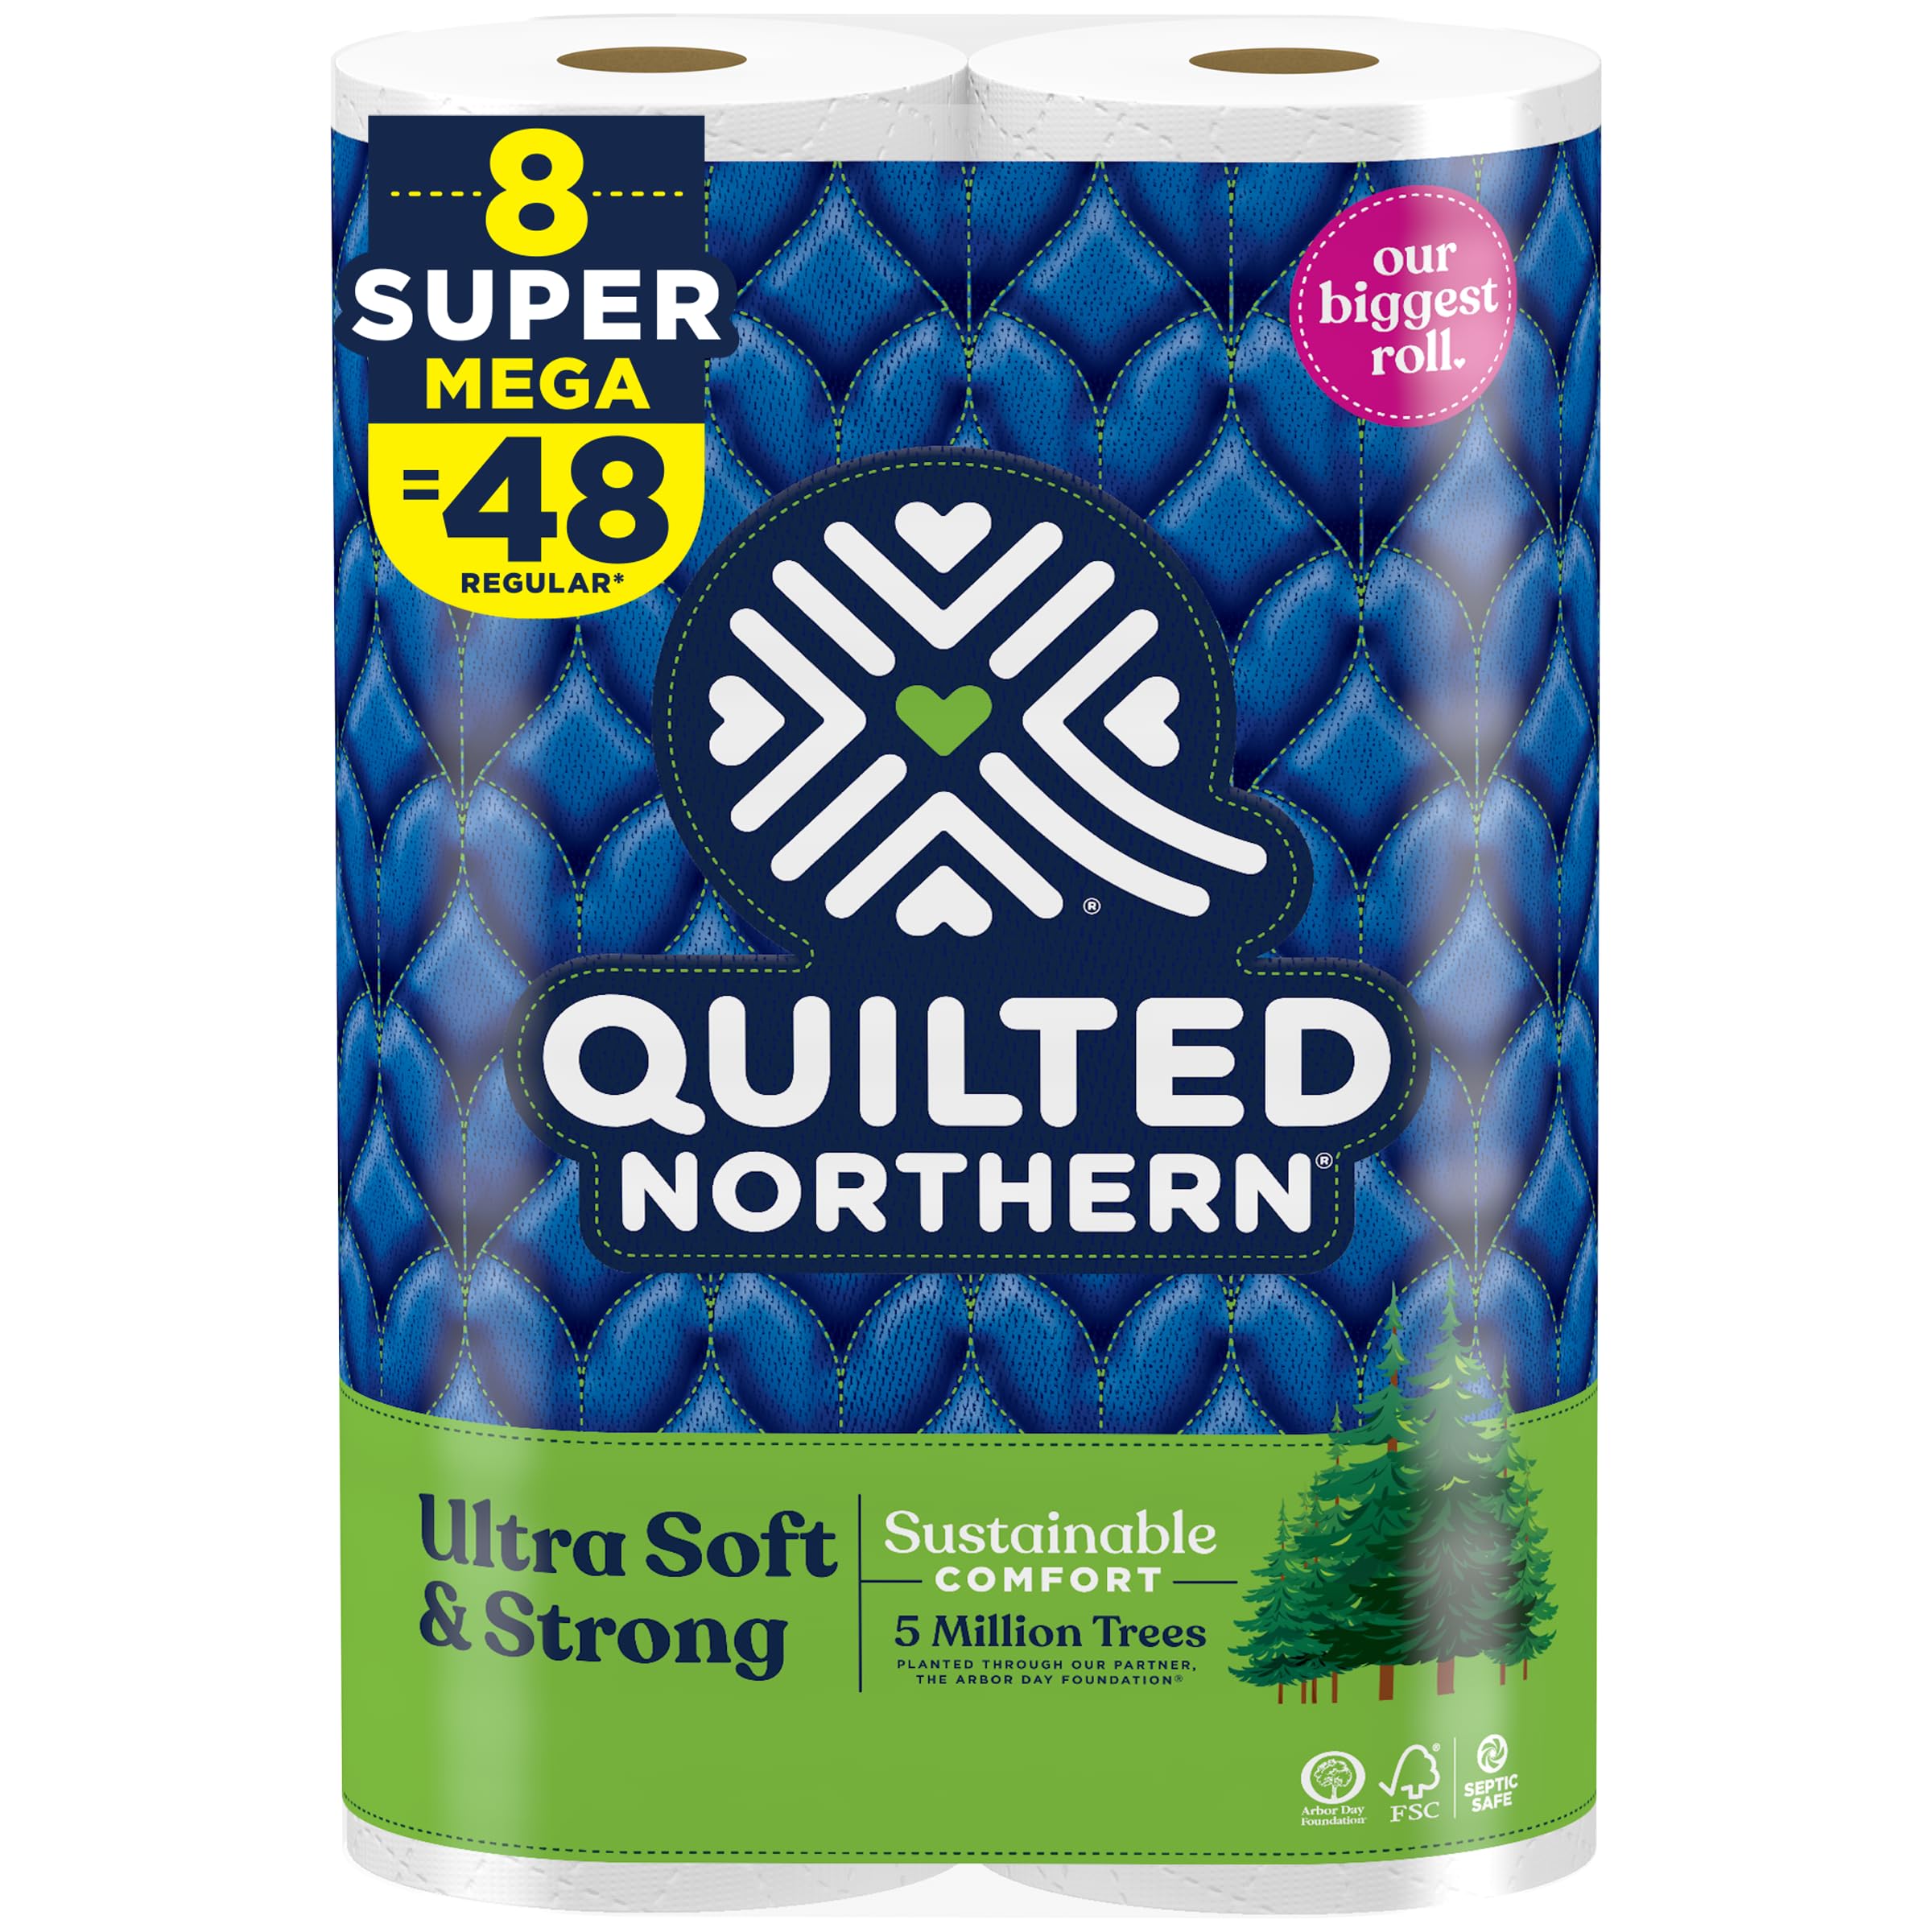 8-Count Quilted Northern Ultra Soft & Strong or Ultra Plush Toilet Paper Super Mega Rolls (~48 Regular Rolls) $10.84 w/ S&S & More + Free Shipping w/ Prime or on $35+